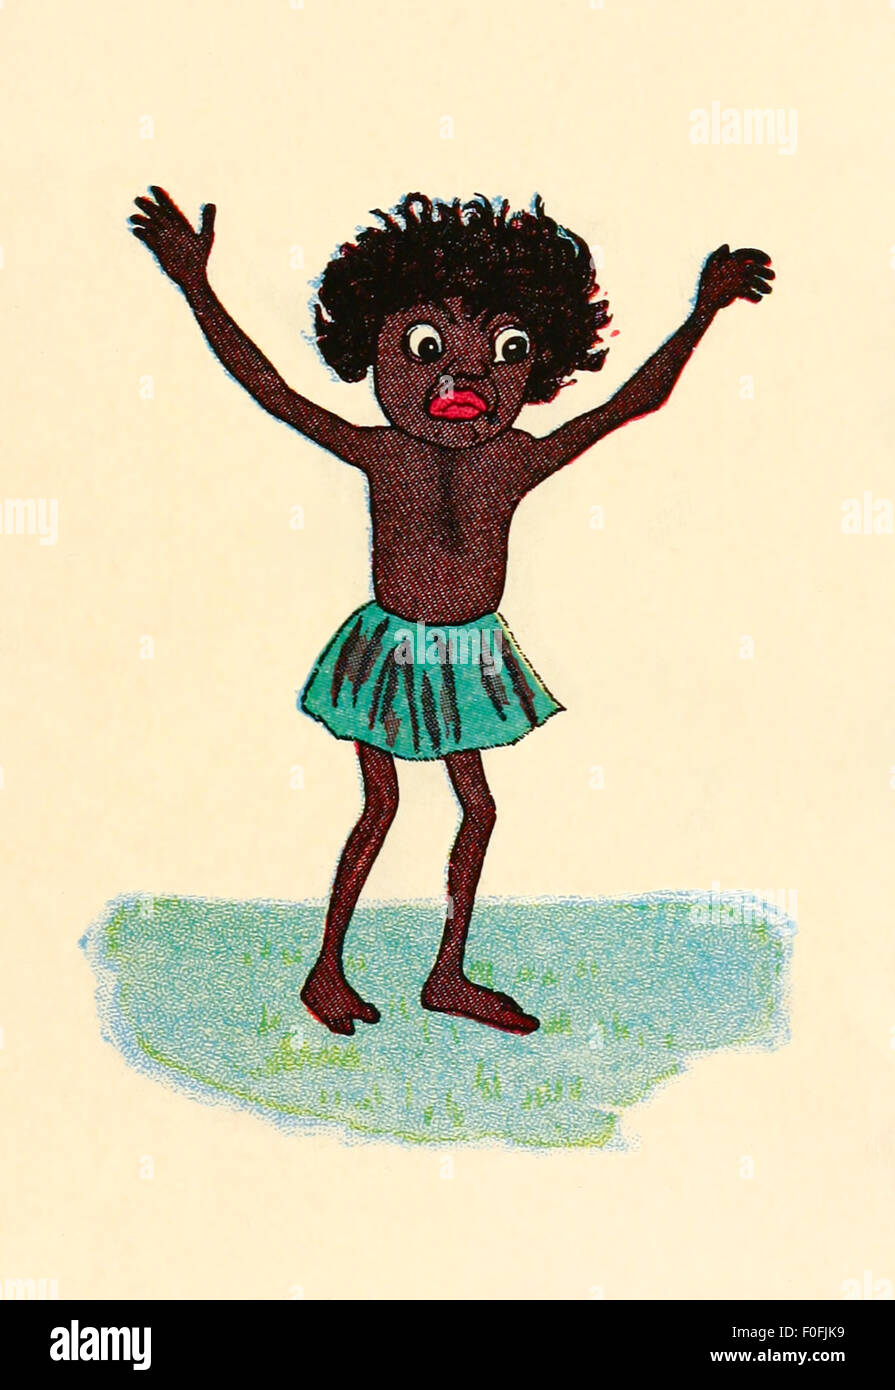 Little Black Sambo hears all the Tigers he has encountered! Image from 'The Story of Little Black Sambo' by Helen Bannerman. See description for more information. Stock Photo